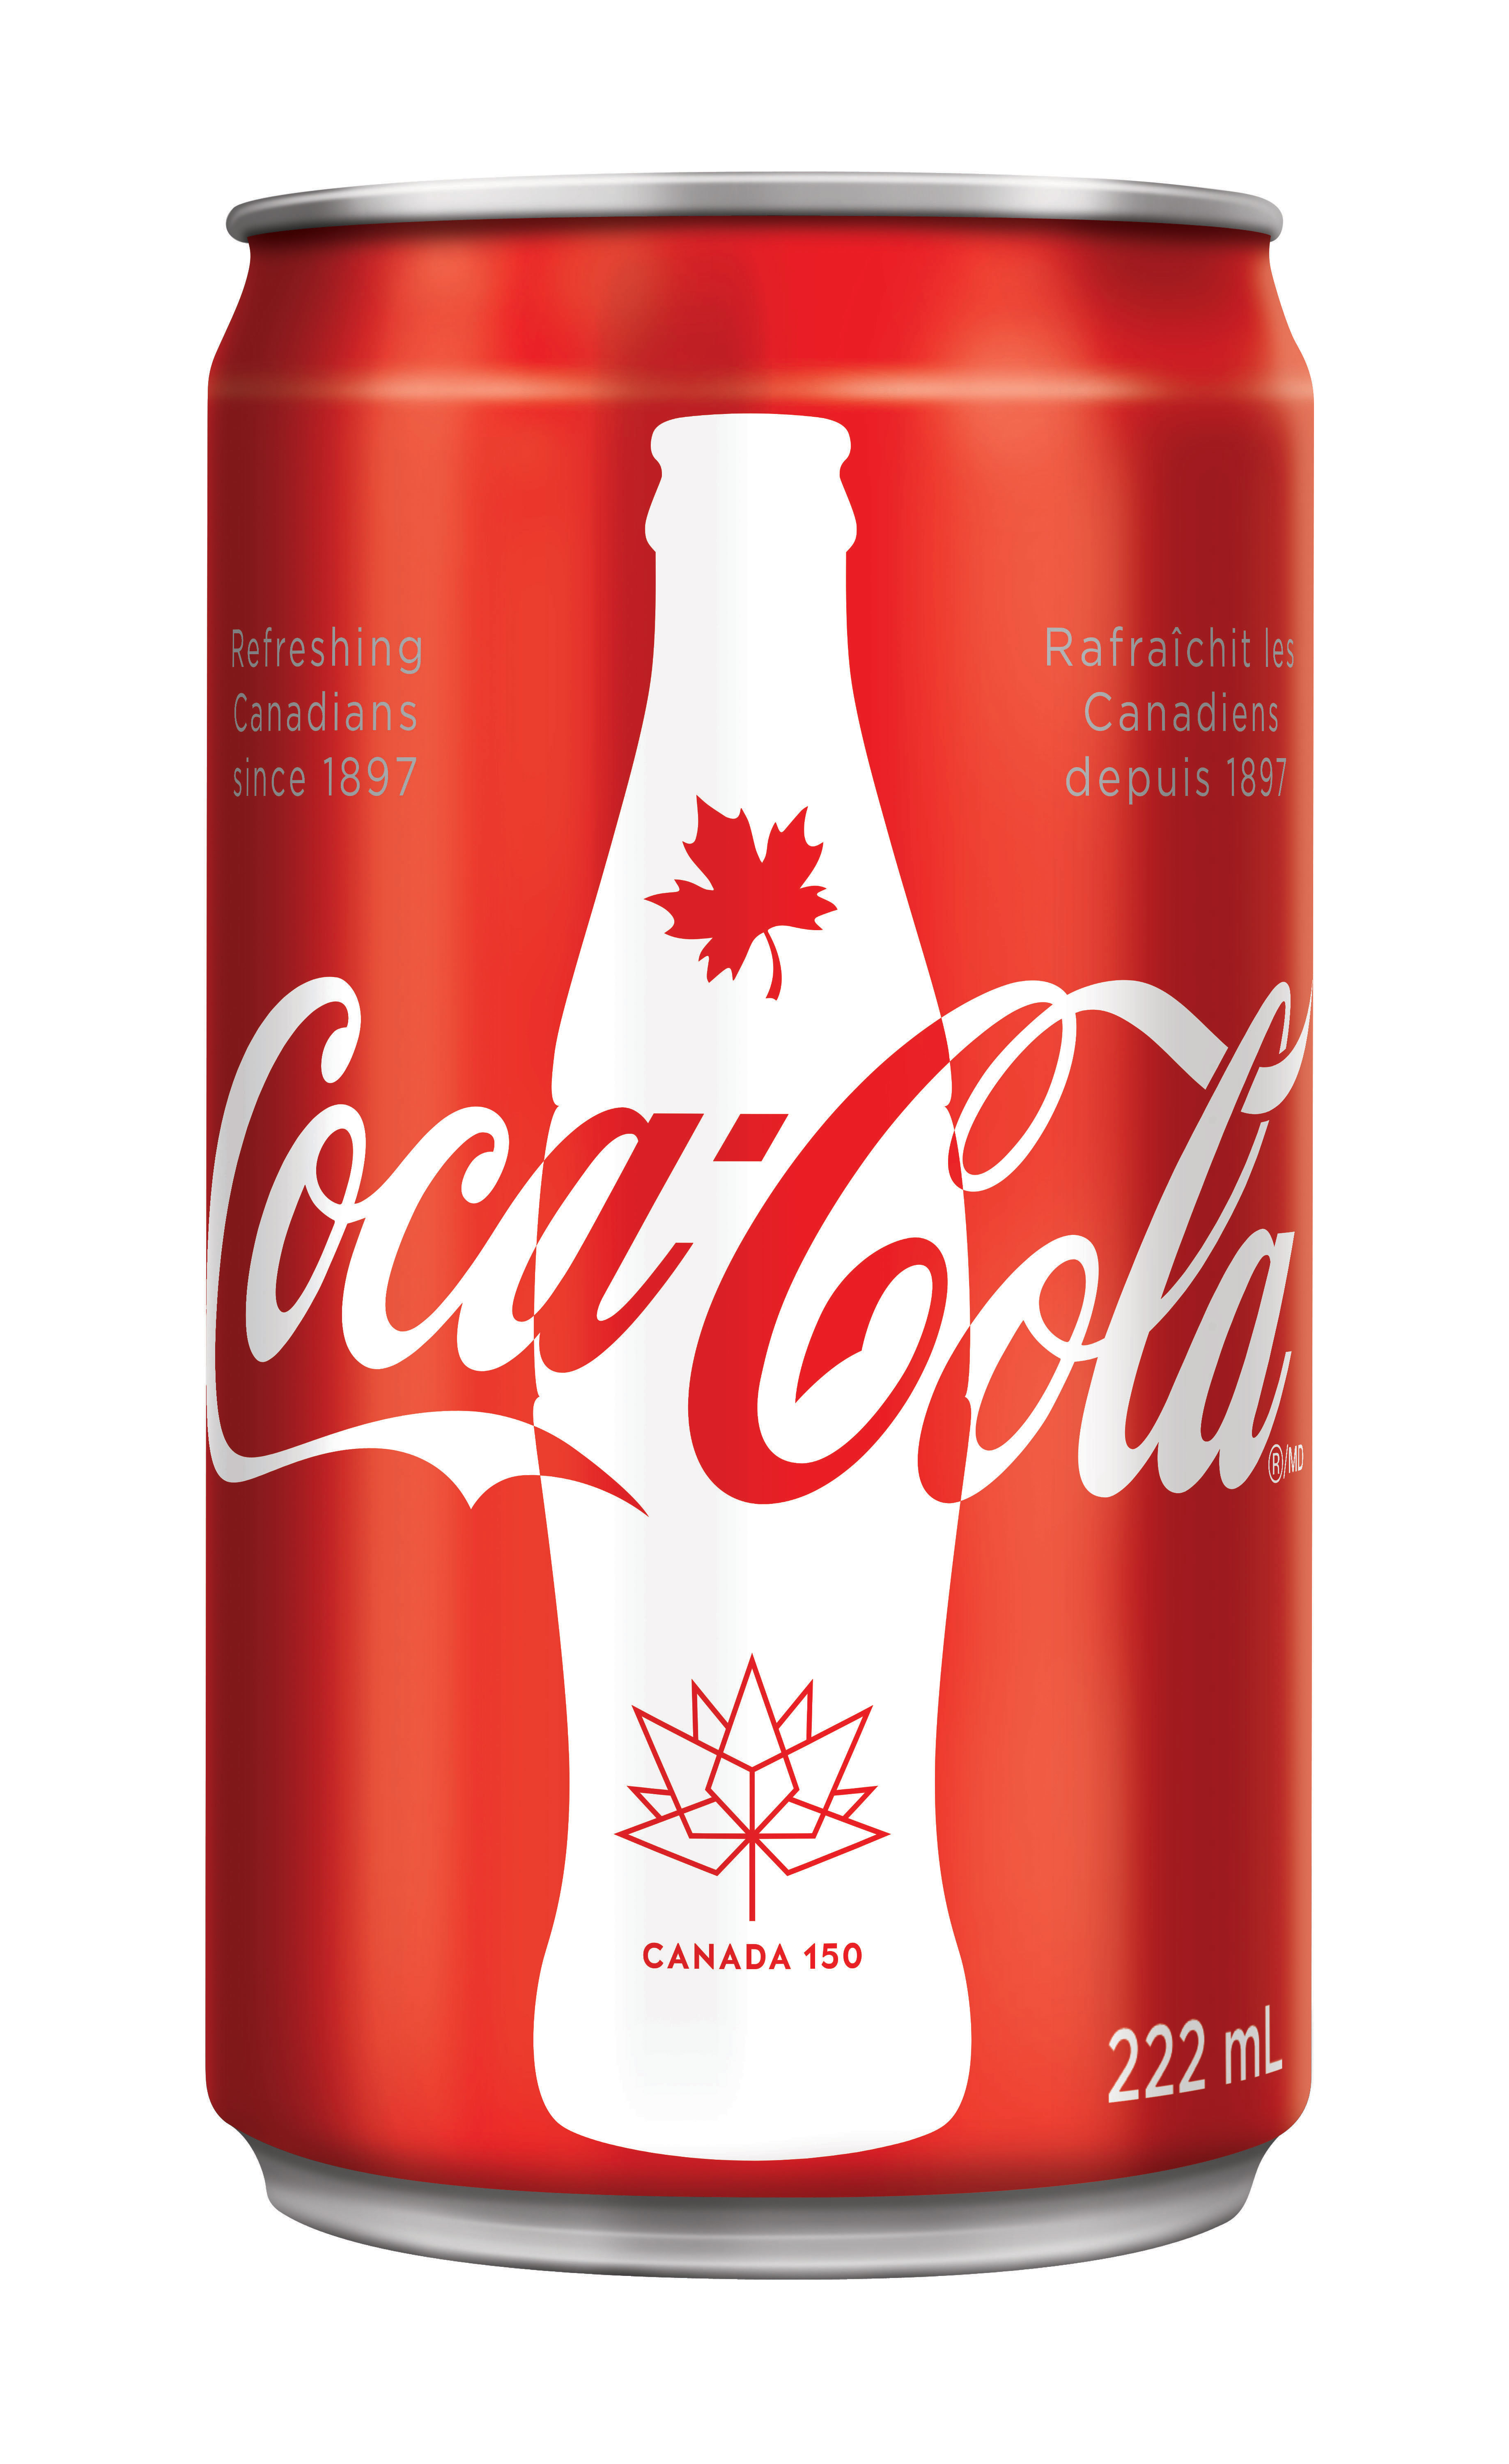 Oh Canada! CocaCola Shows Canadian Pride with Commemorative Can, TV